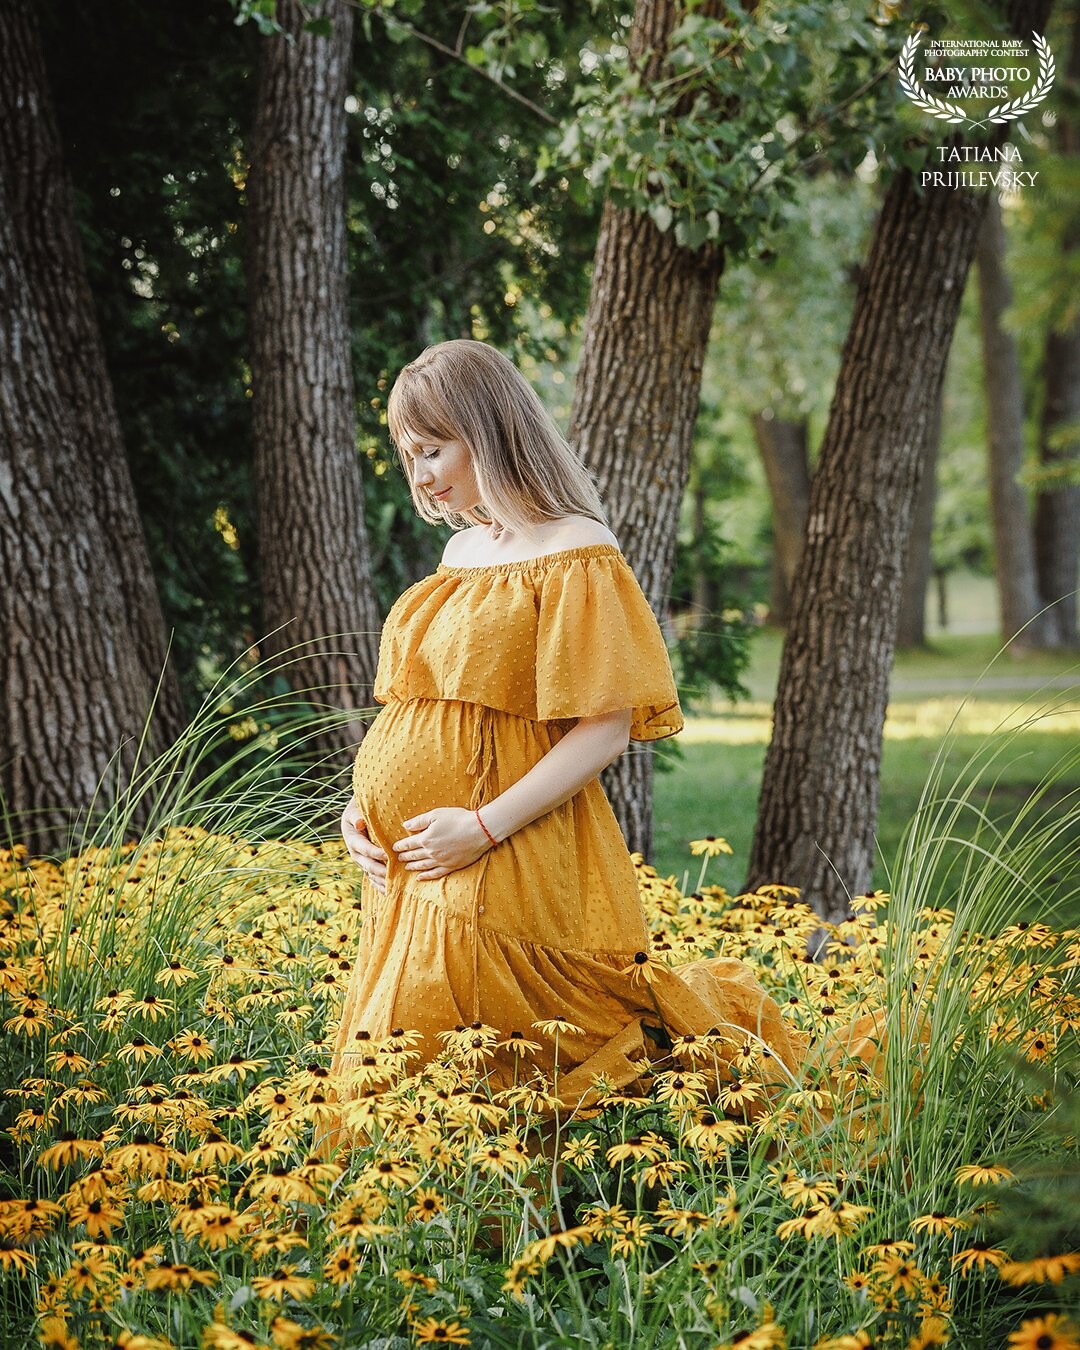 The image is so refined. It's one of my favorites from summer 2022! Seeing this small row of yellow flowers from a previous session! I know exactly what I will do at the next photo session and the color of the dress was chosen intentionally. So it works well for me to visualize the result in your head.